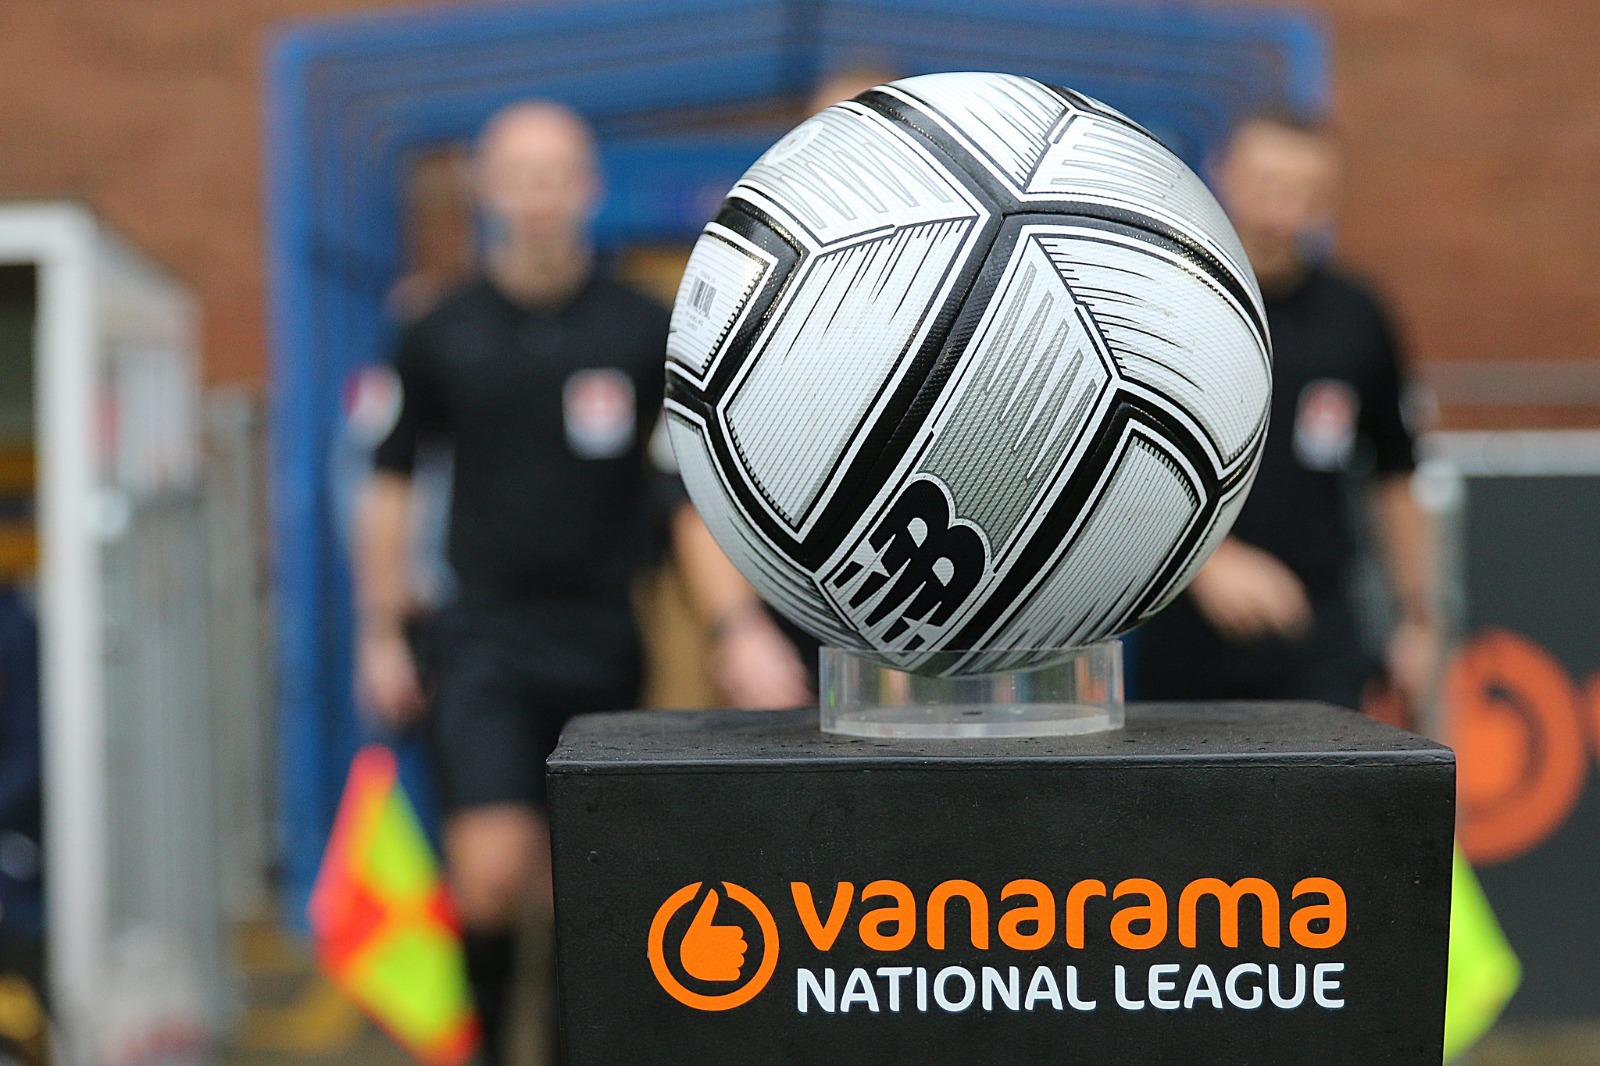 Vanarama National League stand with football on top